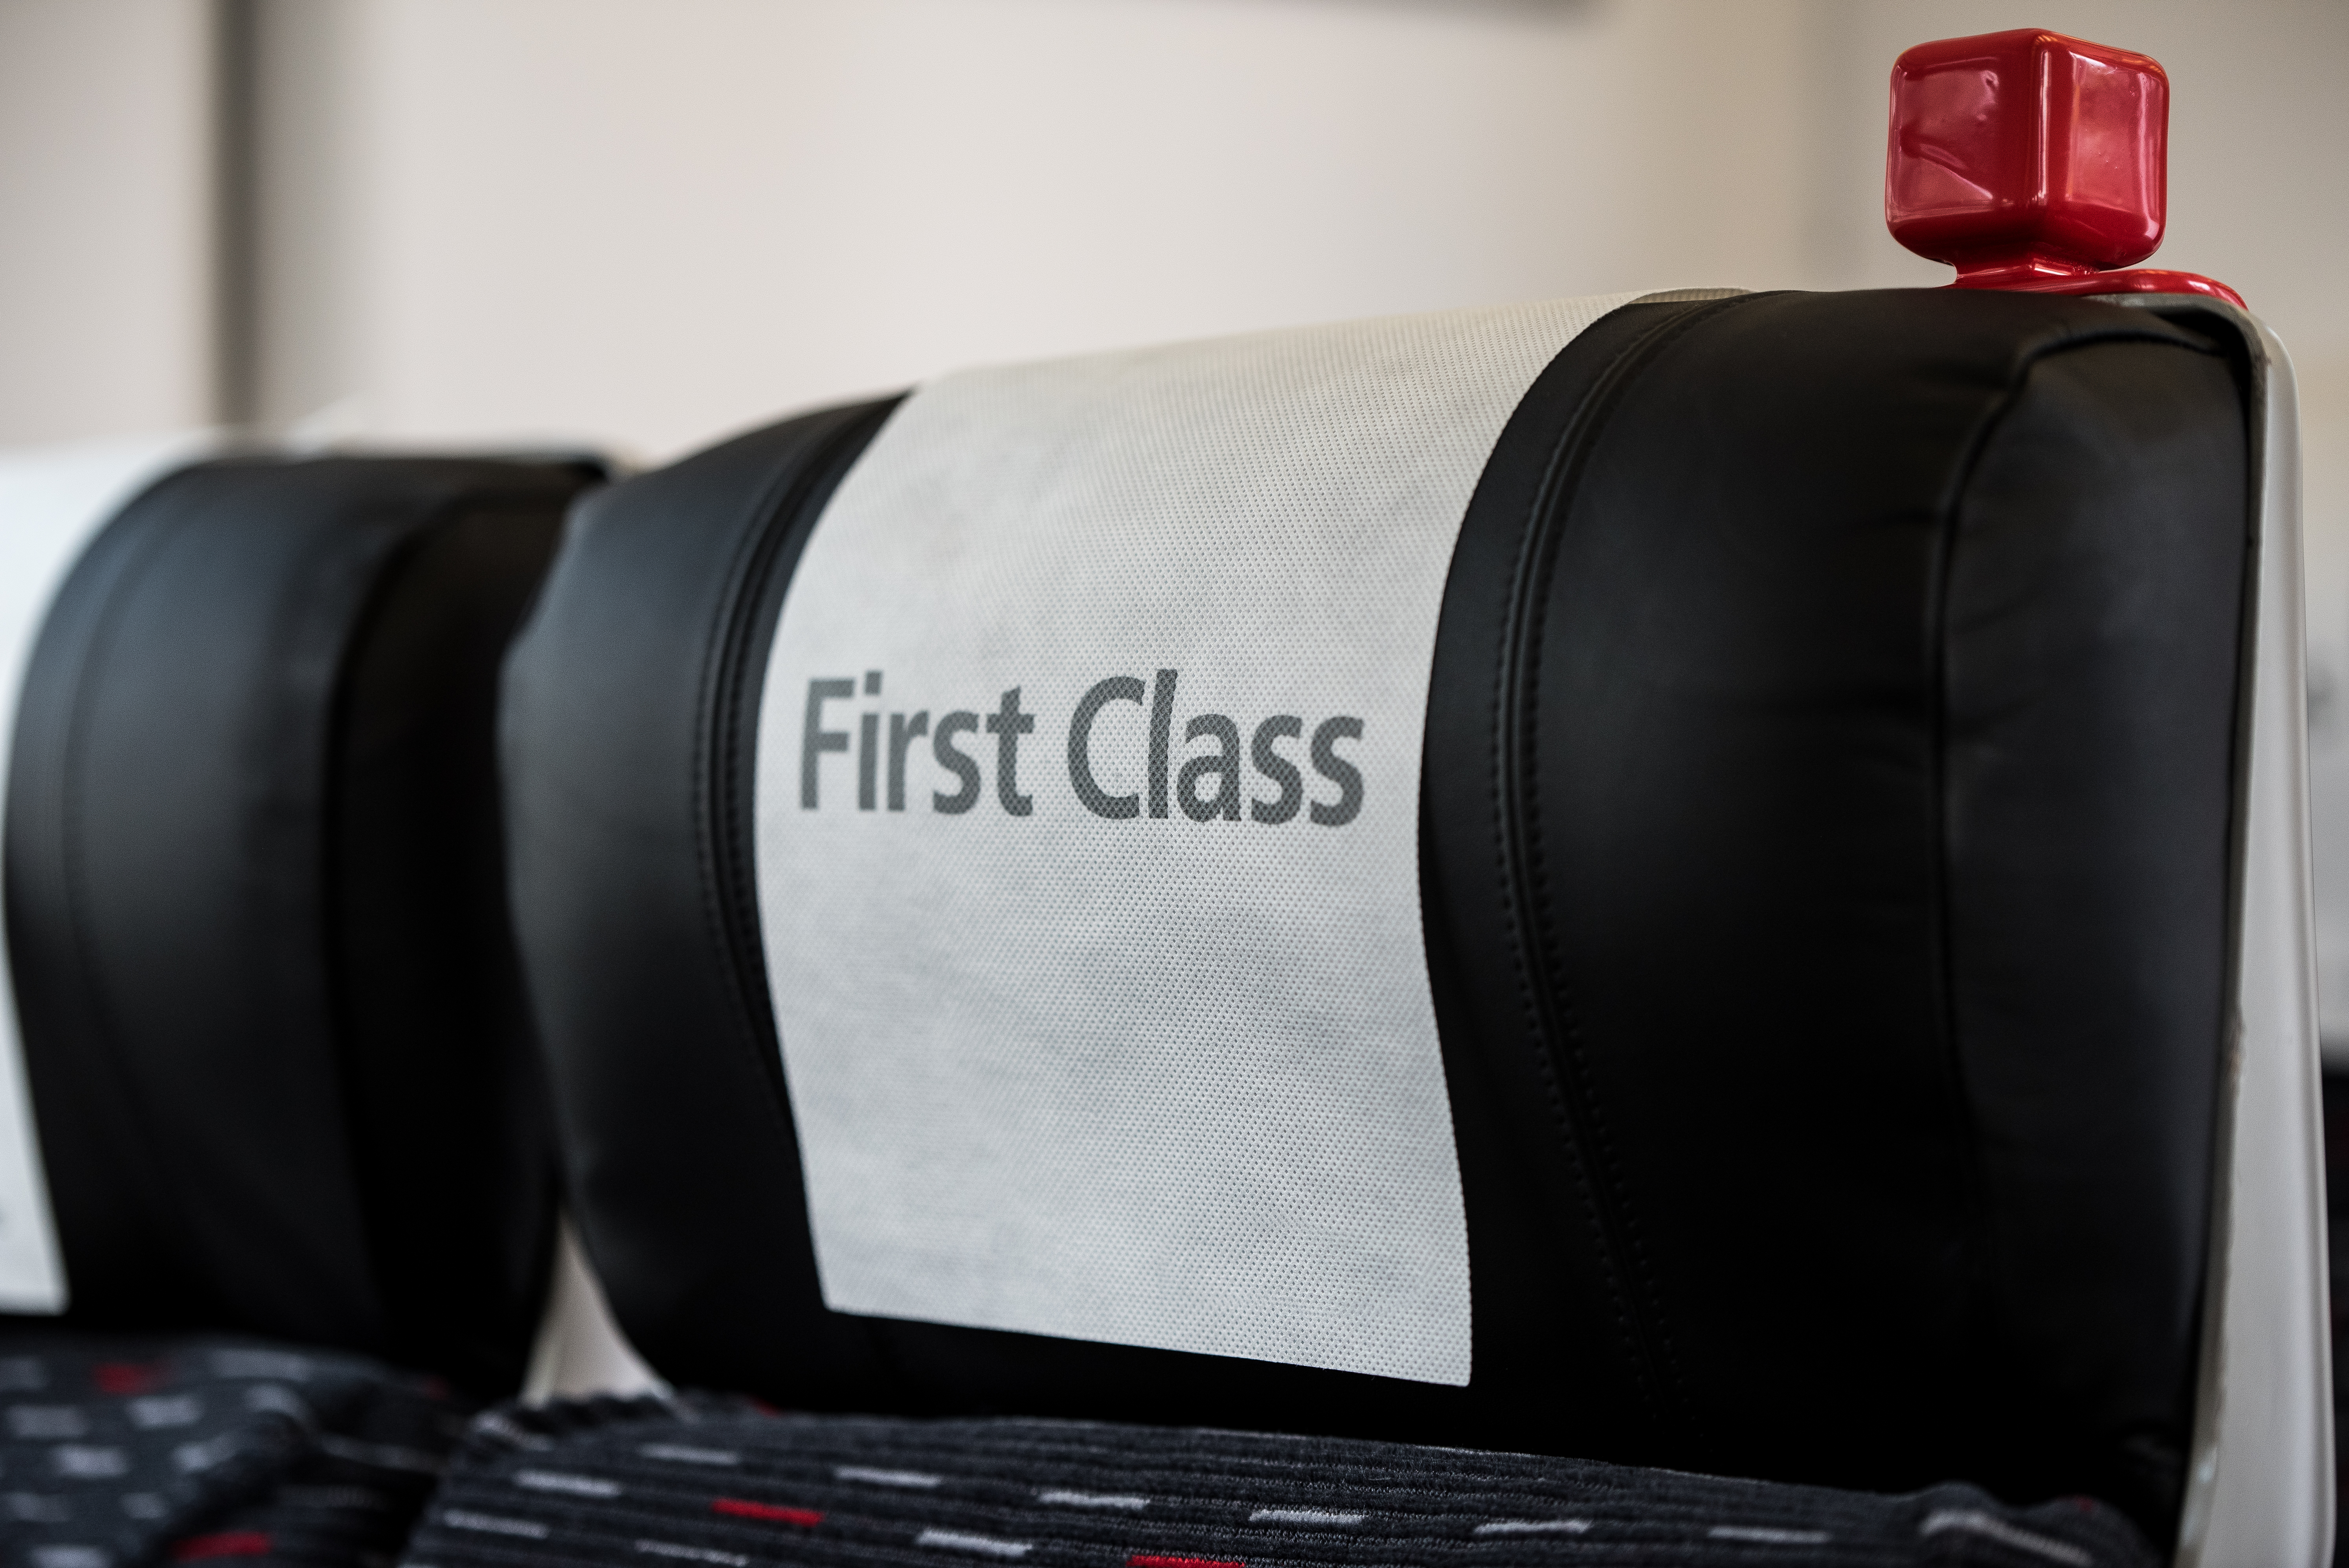 A train seat with a sign that reads "First Class" | Source: Shutterstock